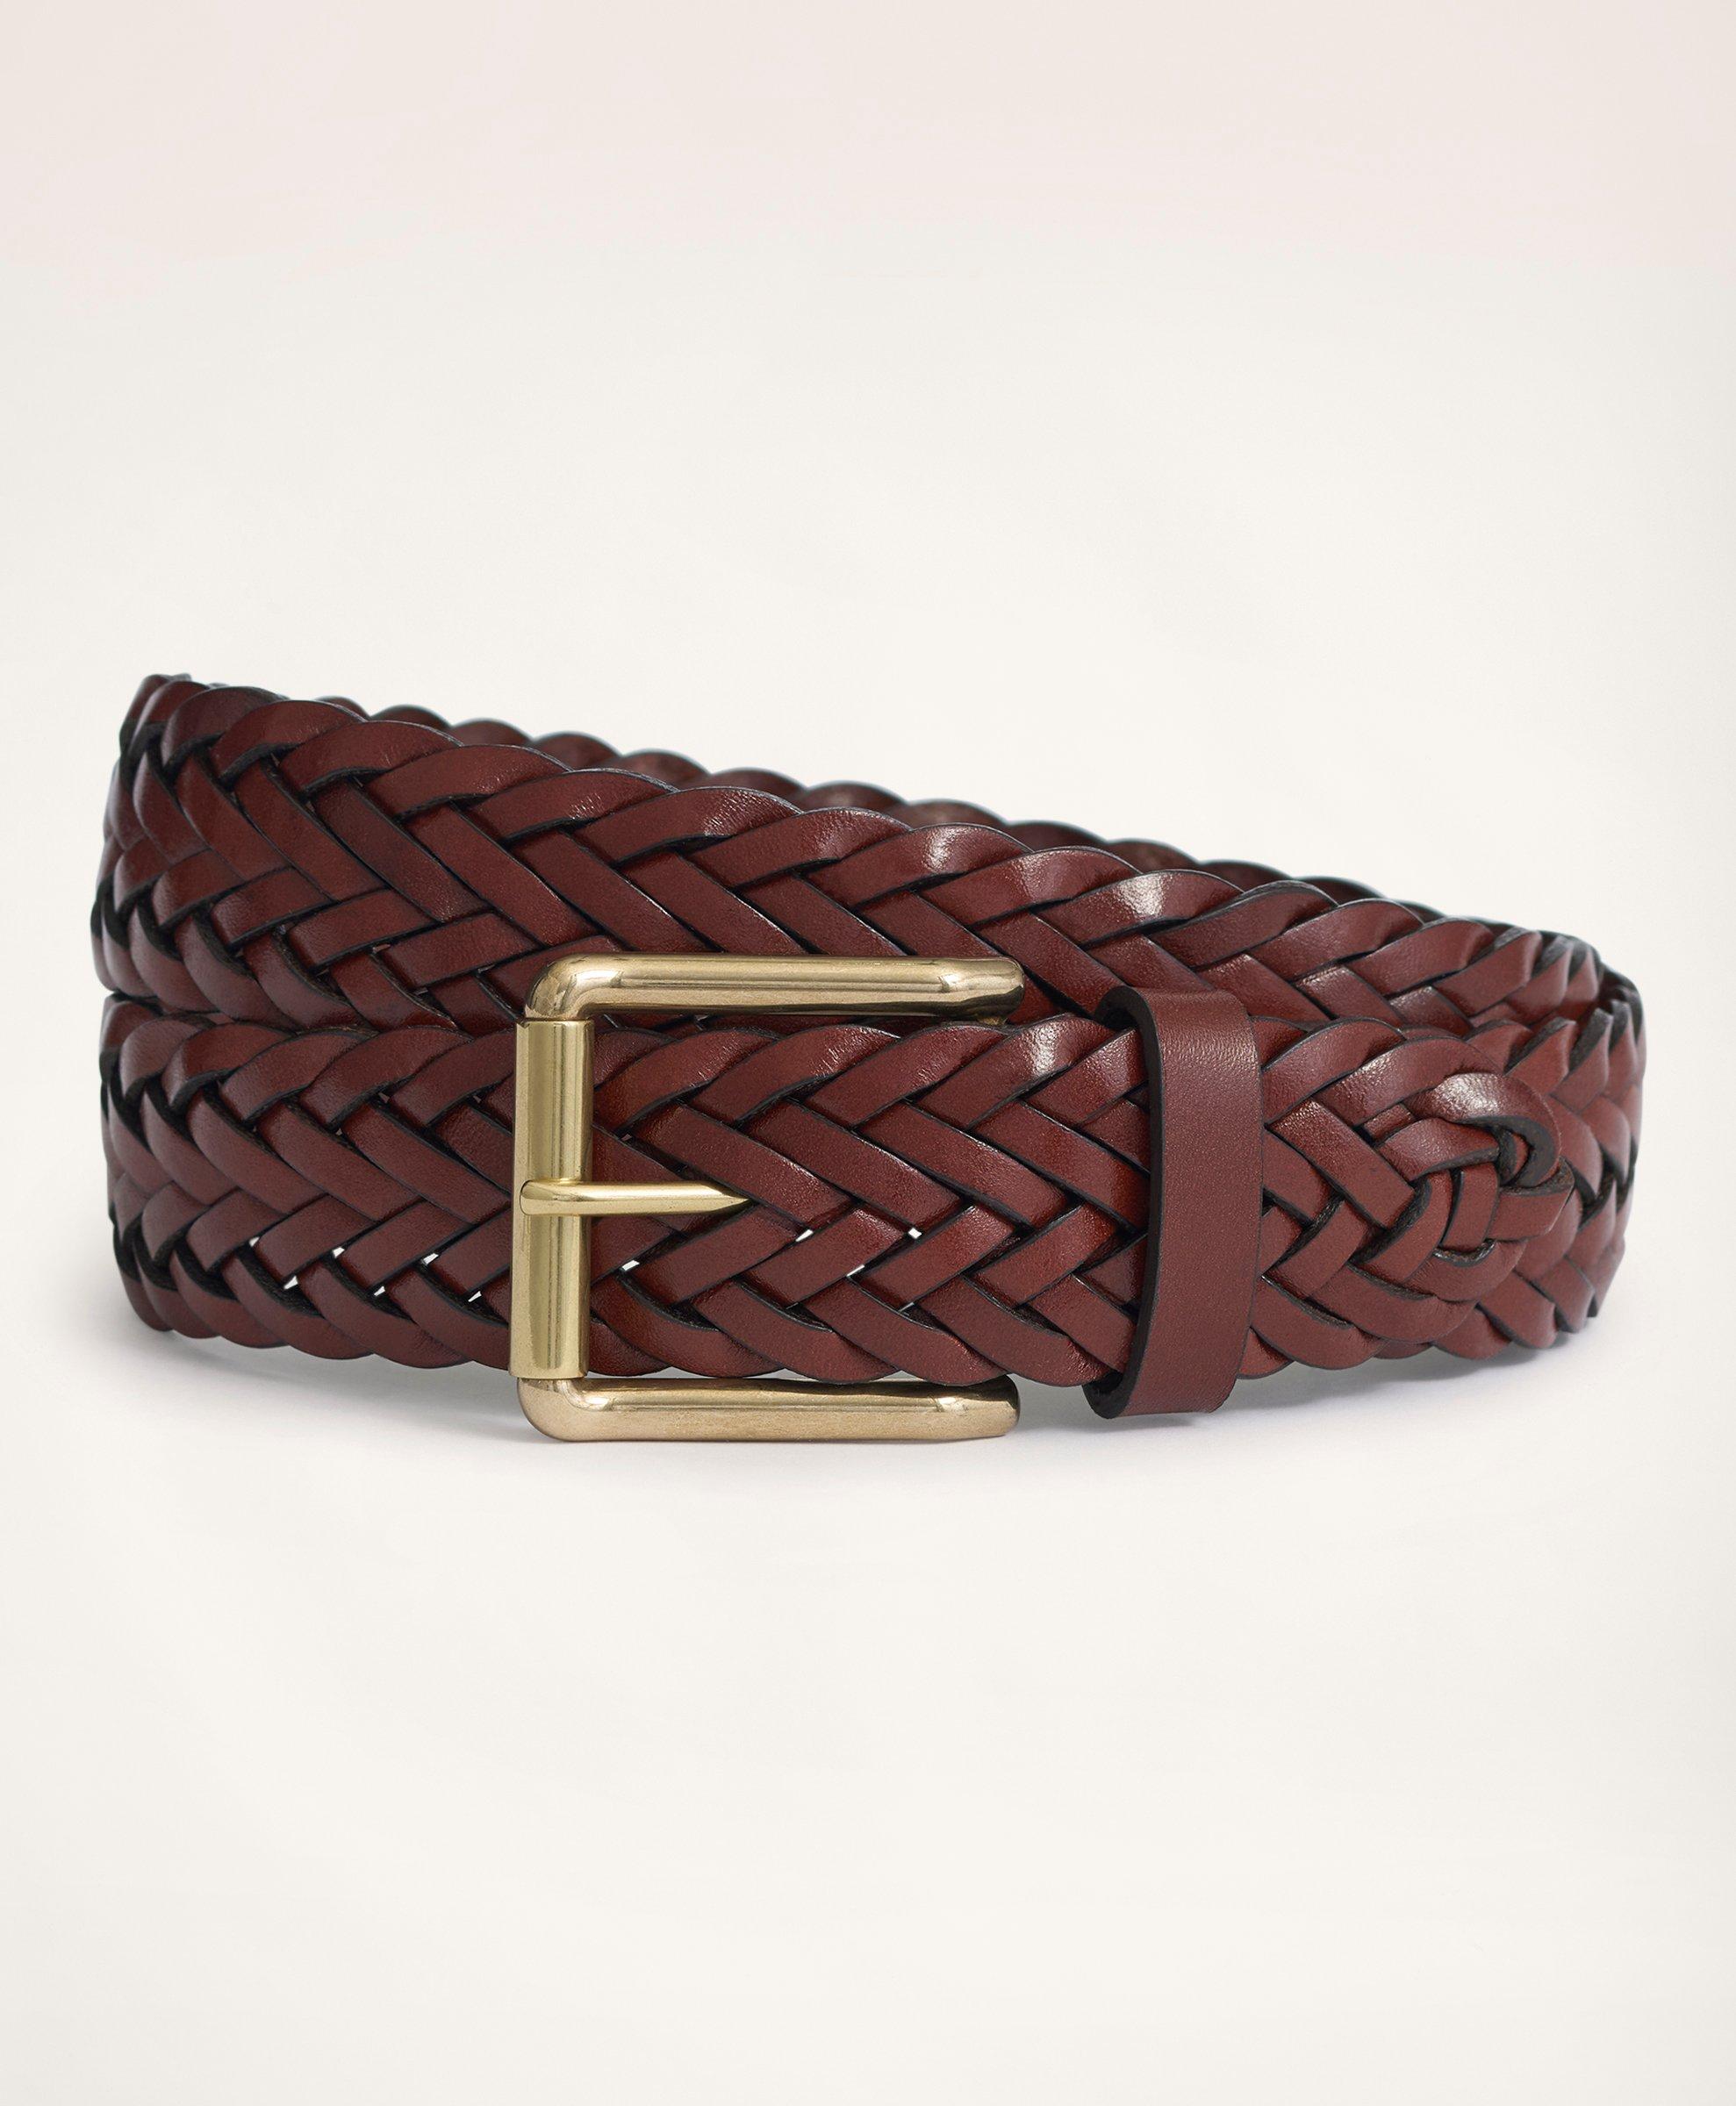 Brooks Brothers Woven Leather Stretch Belt, $188